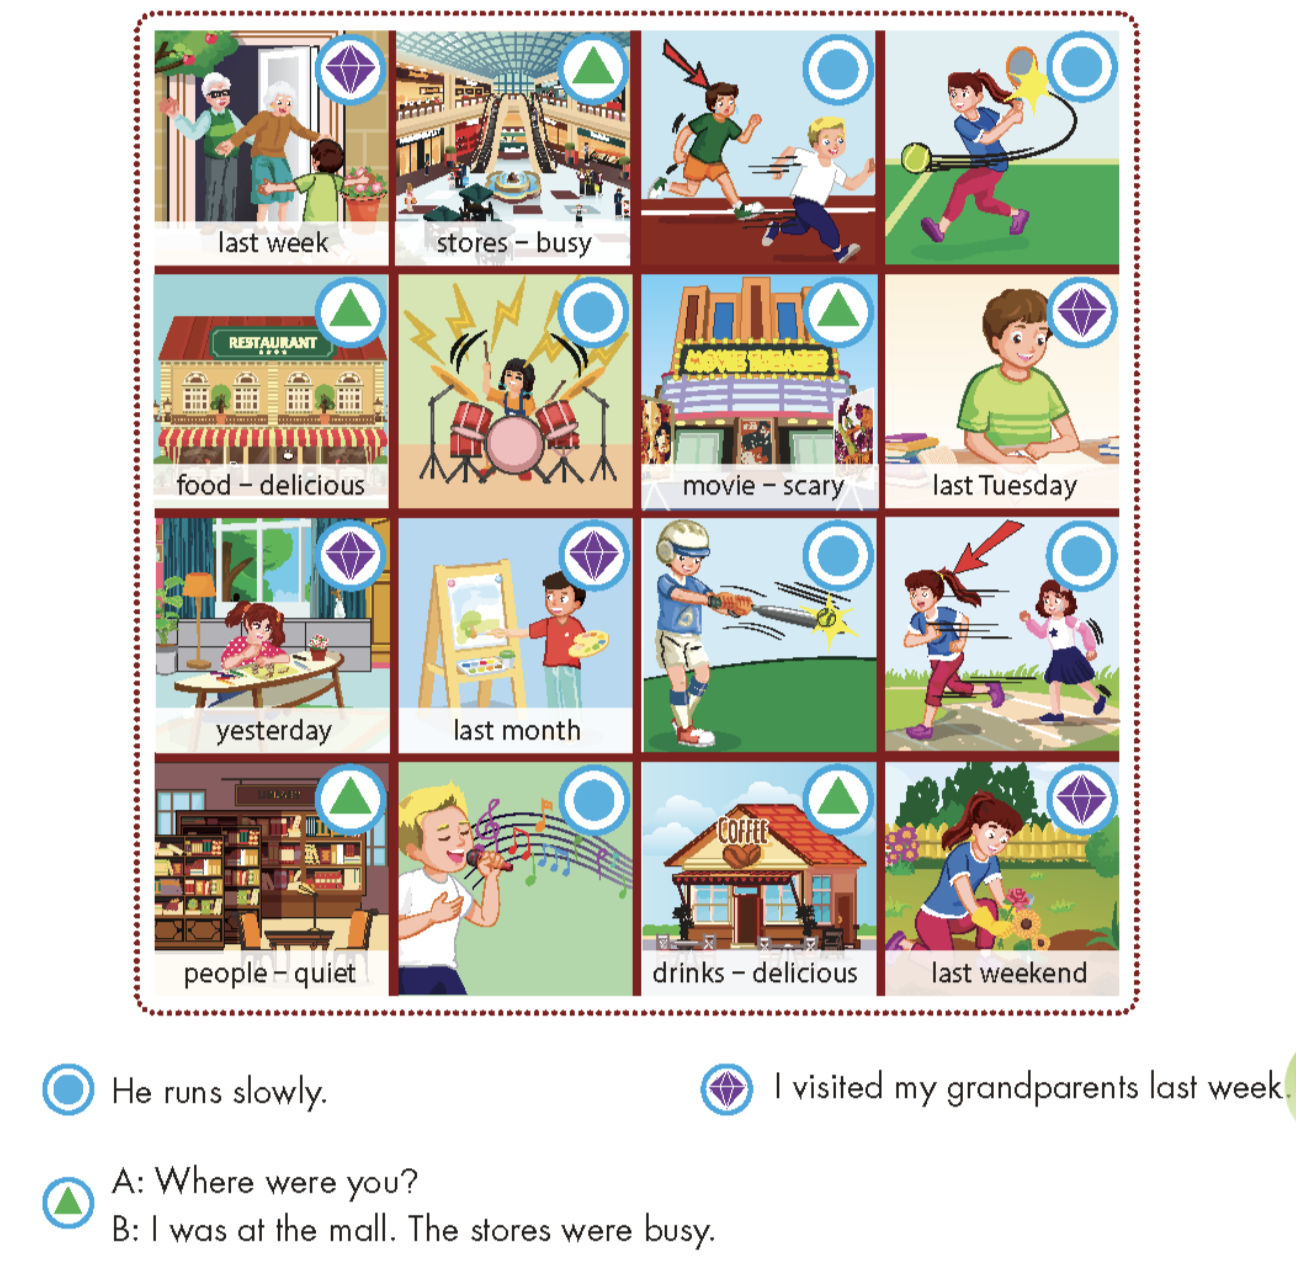 Tiếng Anh lớp 5 Unit 3: My friends and I - ilearn Smart Start (ảnh 38)